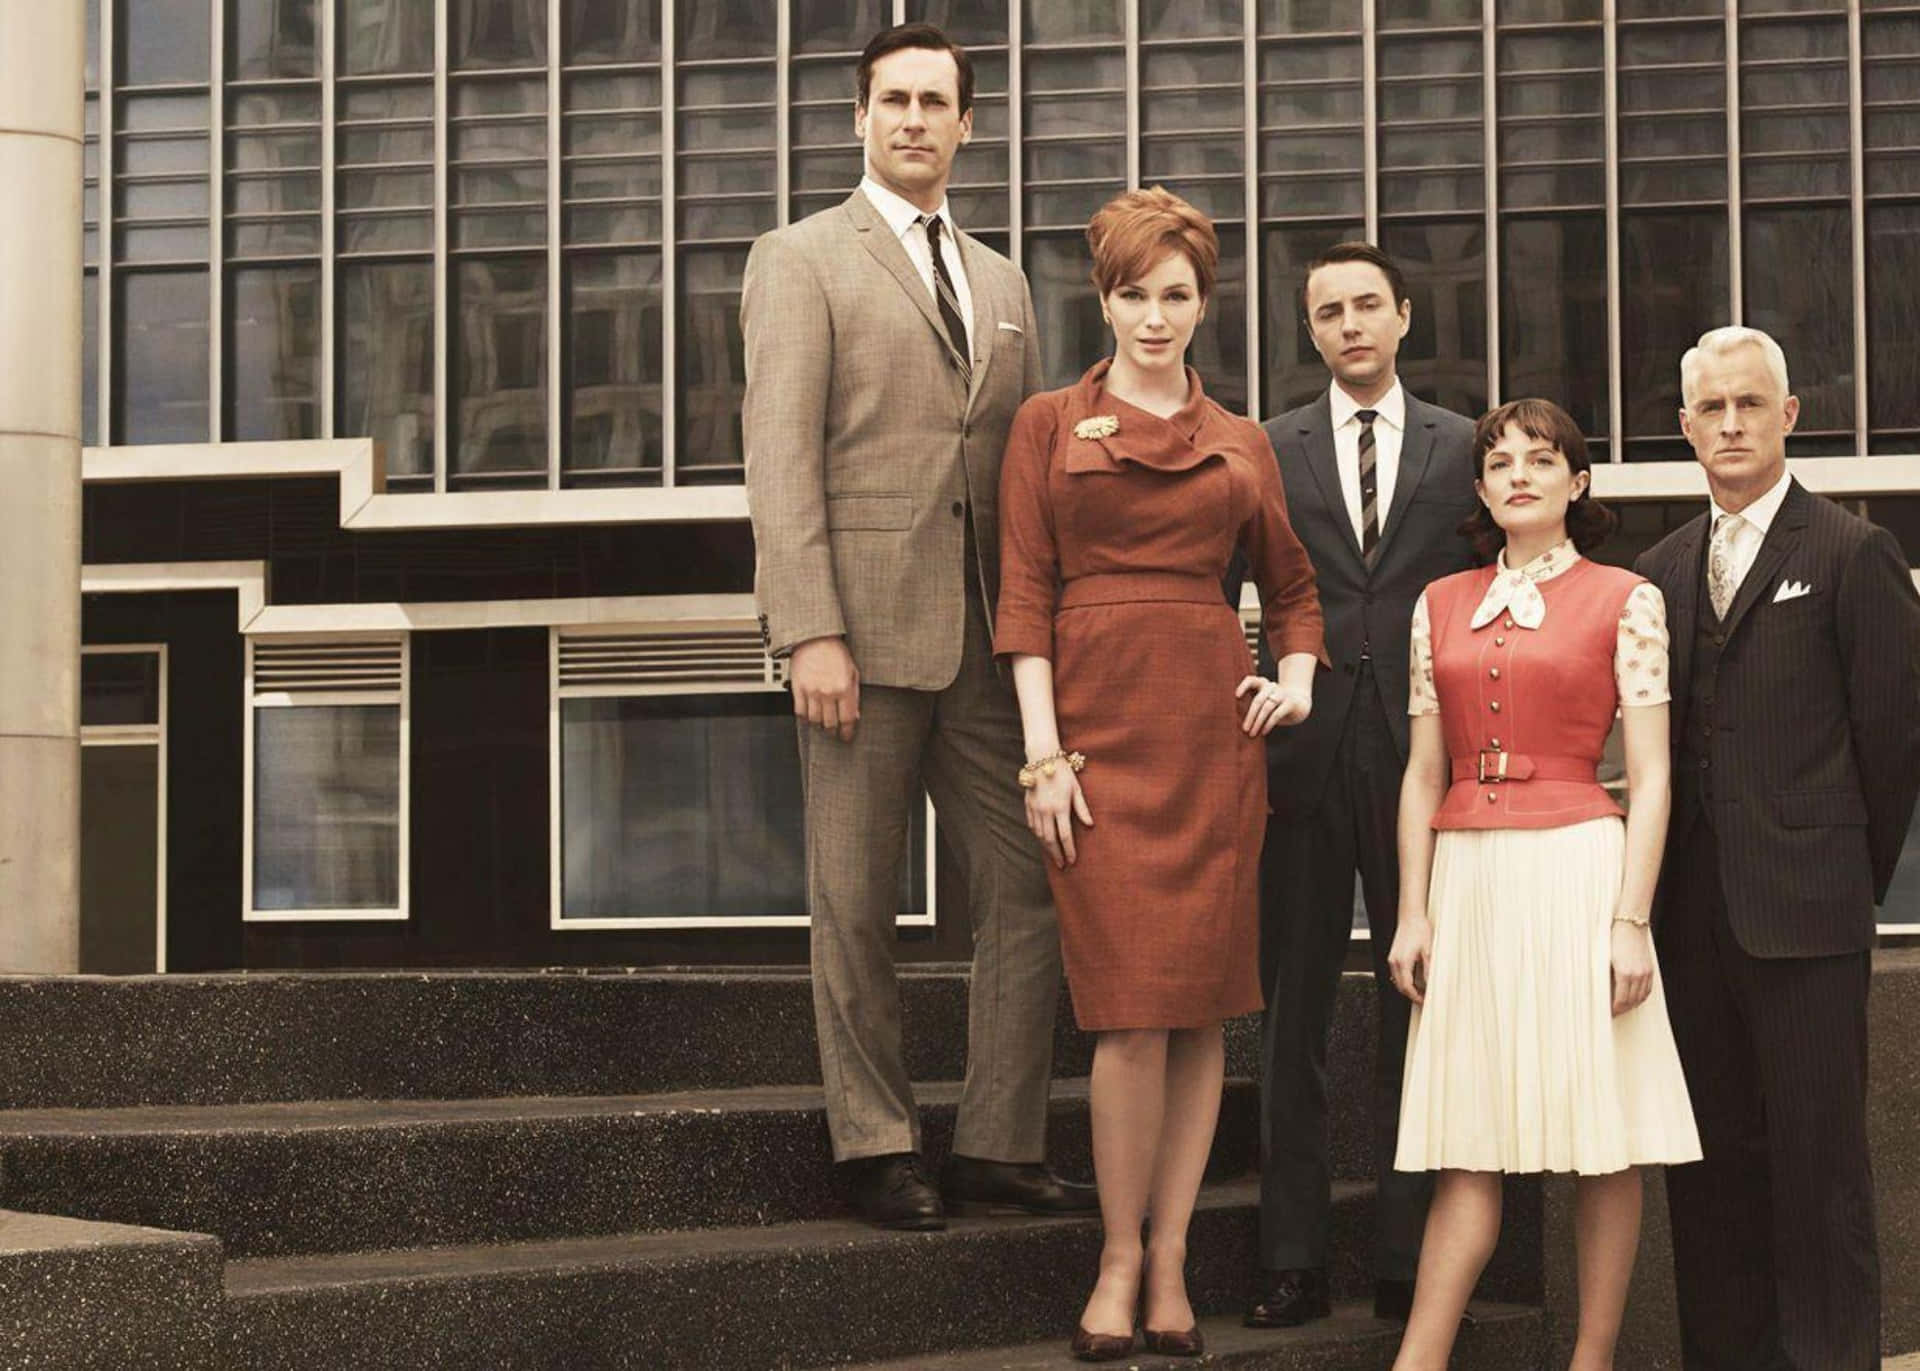 Group Of Mad Men Characters In Iconic Office Setting Wallpaper